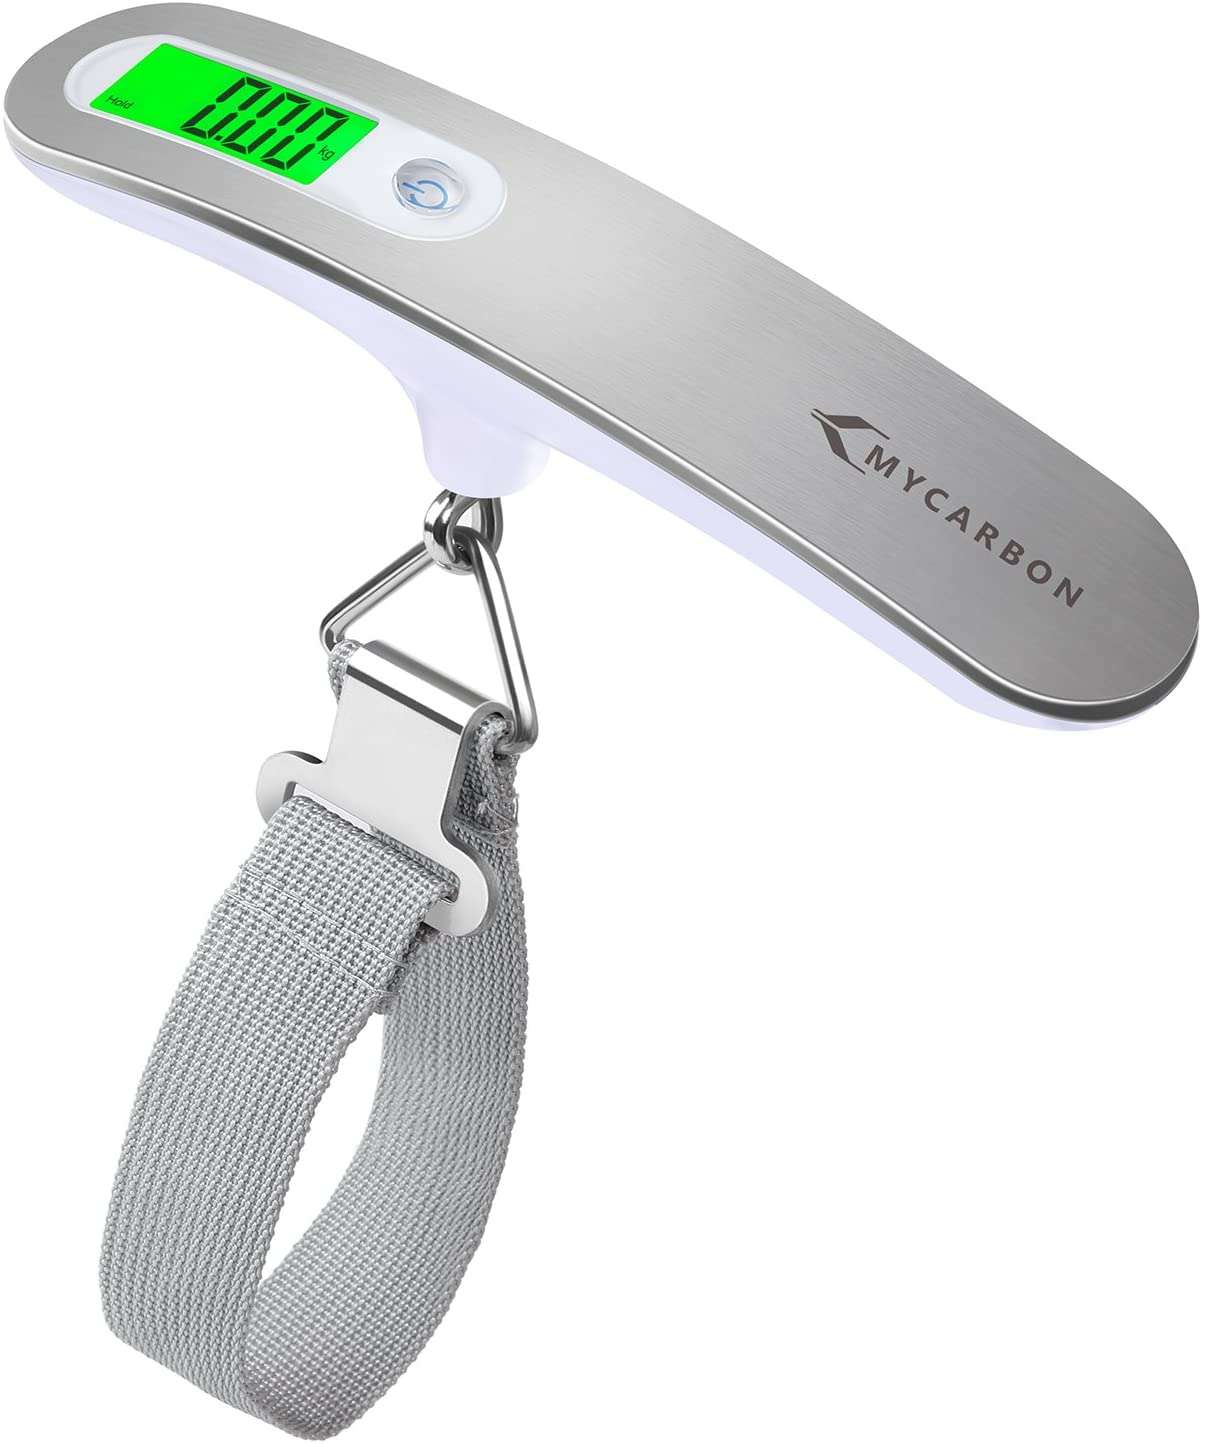 digital travel luggage weighing scale